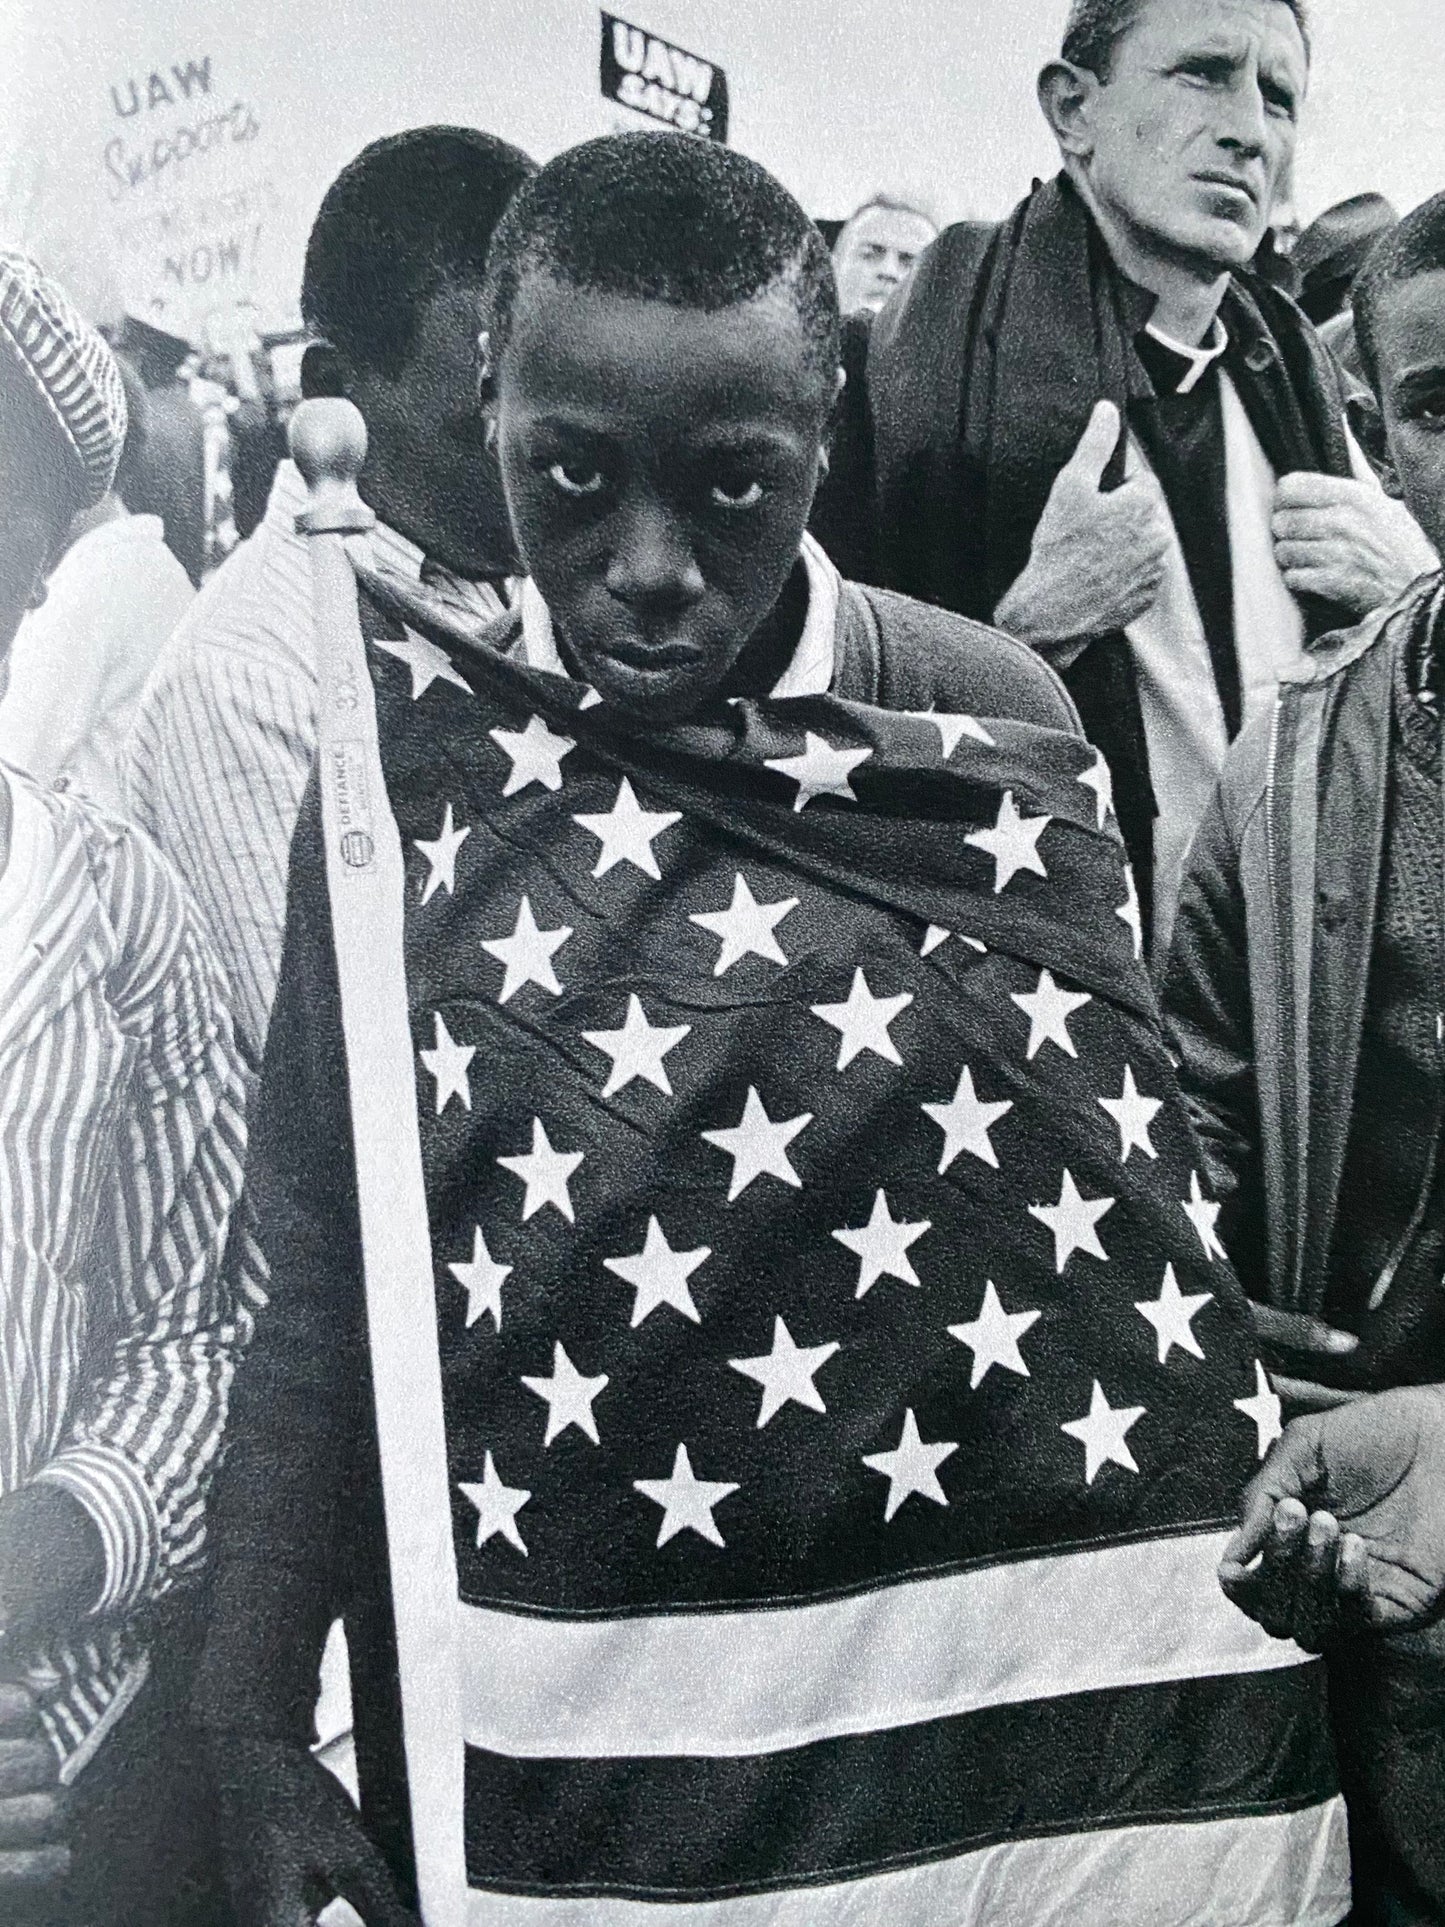 America in Crisis: Photographed by Magnum (1969)